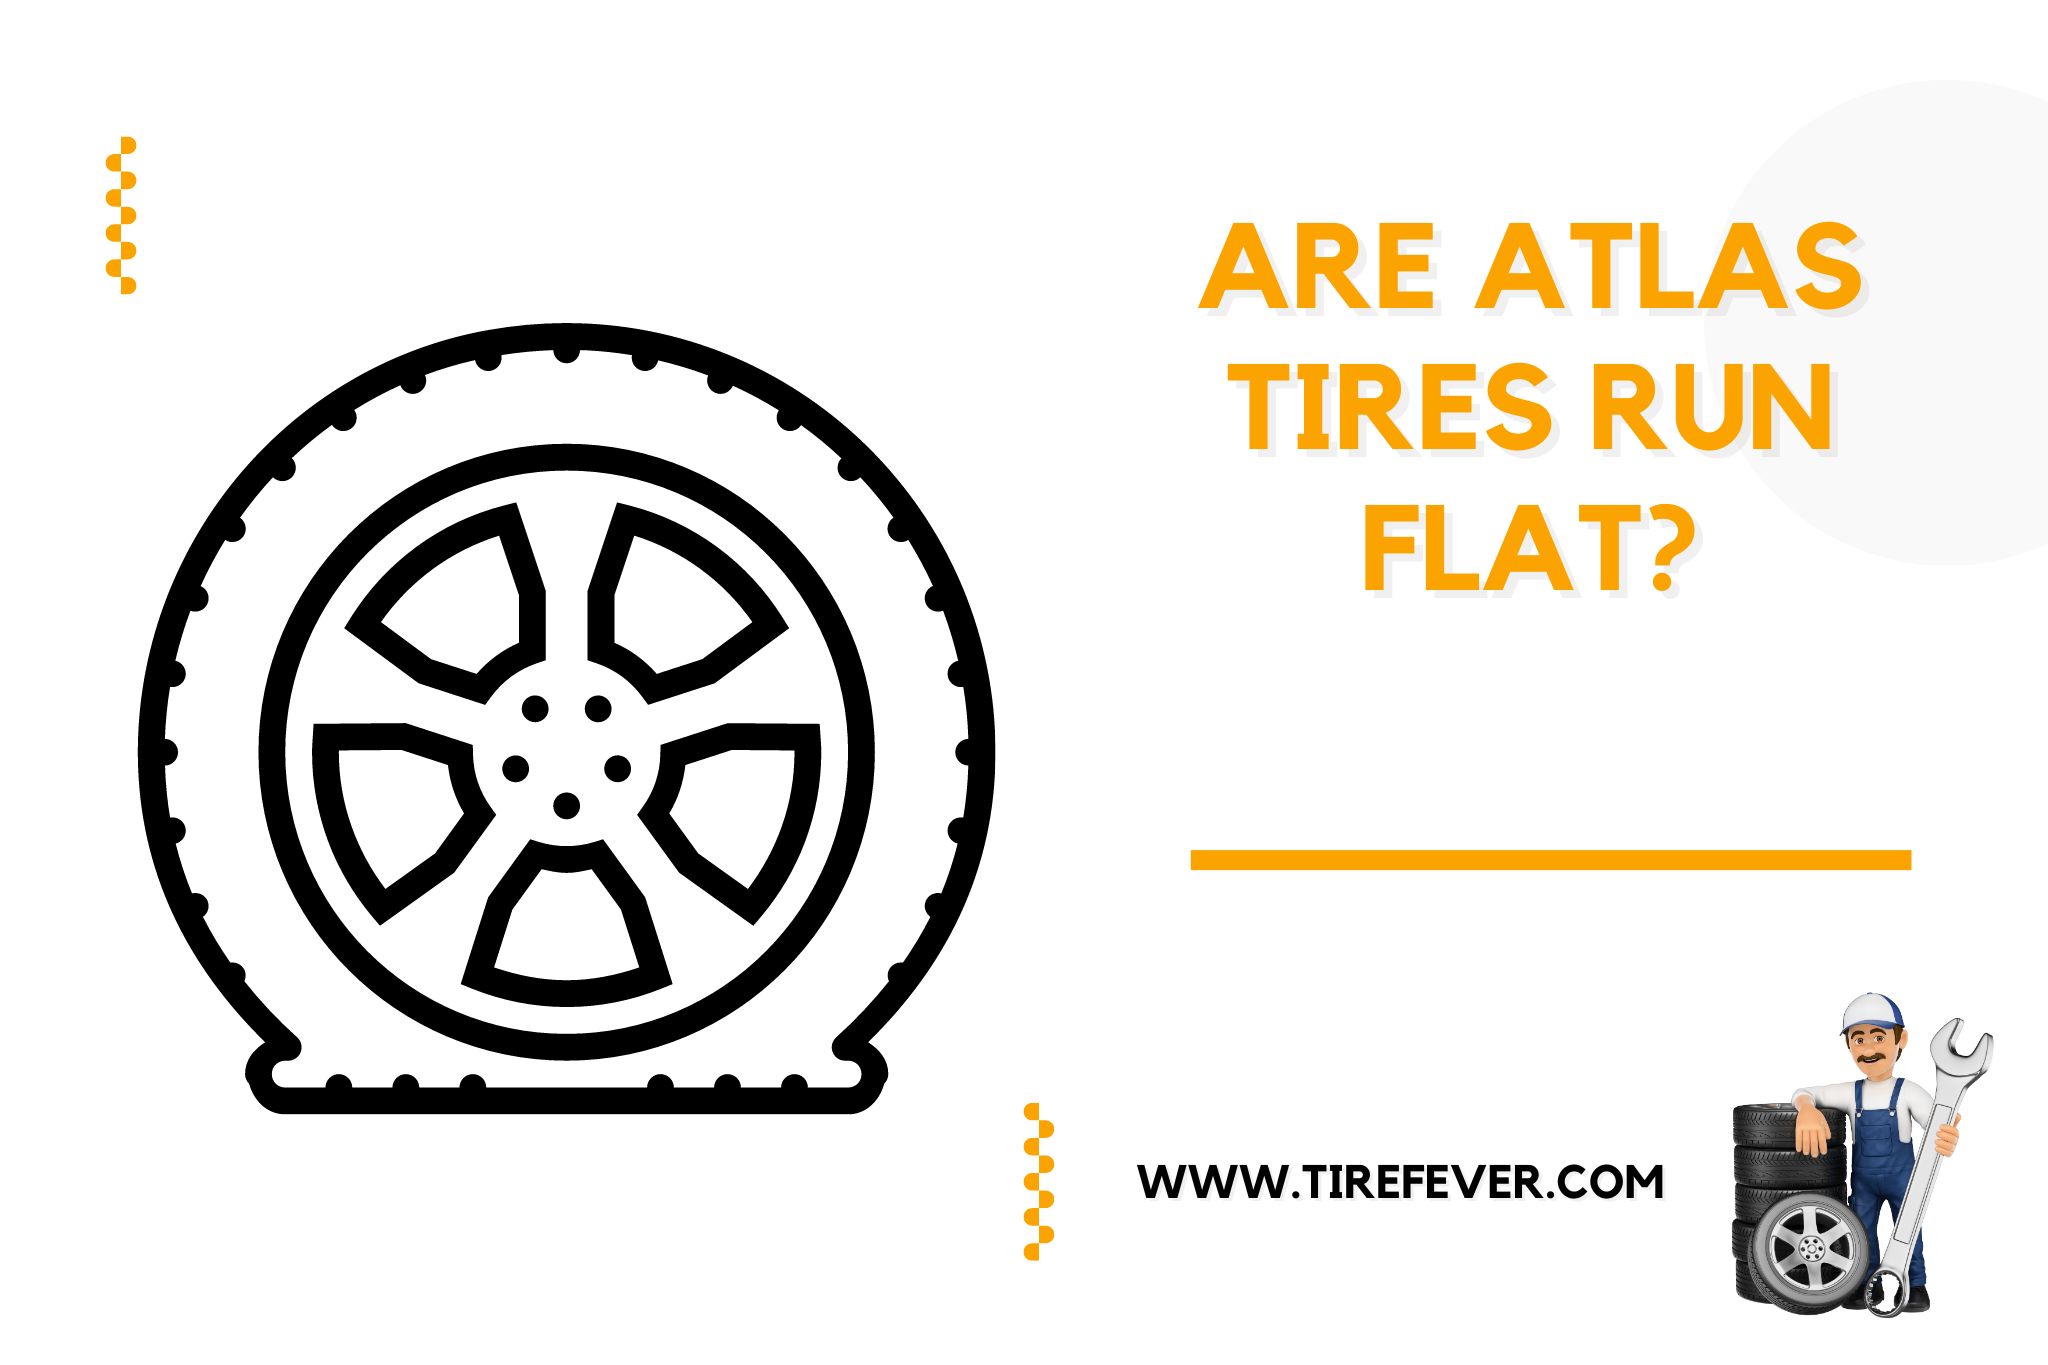 Are Atlas Tires Run Flat? Discover [The Truth] Today!
Uncover the Reality: Are Atlas Tires Run Flat? [Find Out Now!]